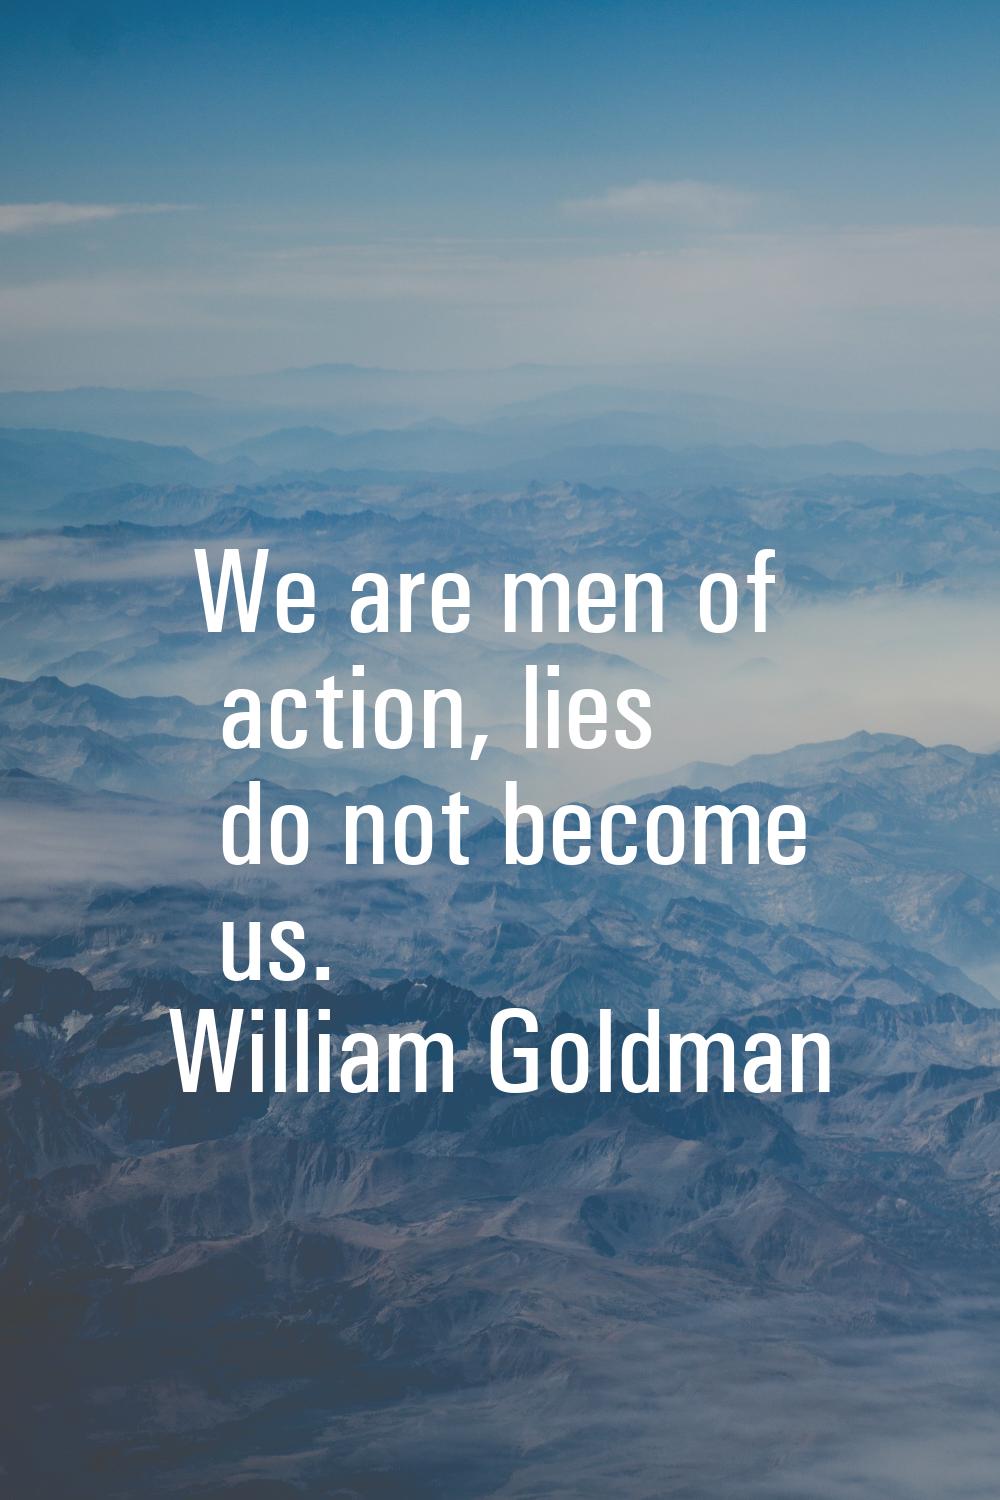 We are men of action, lies do not become us.